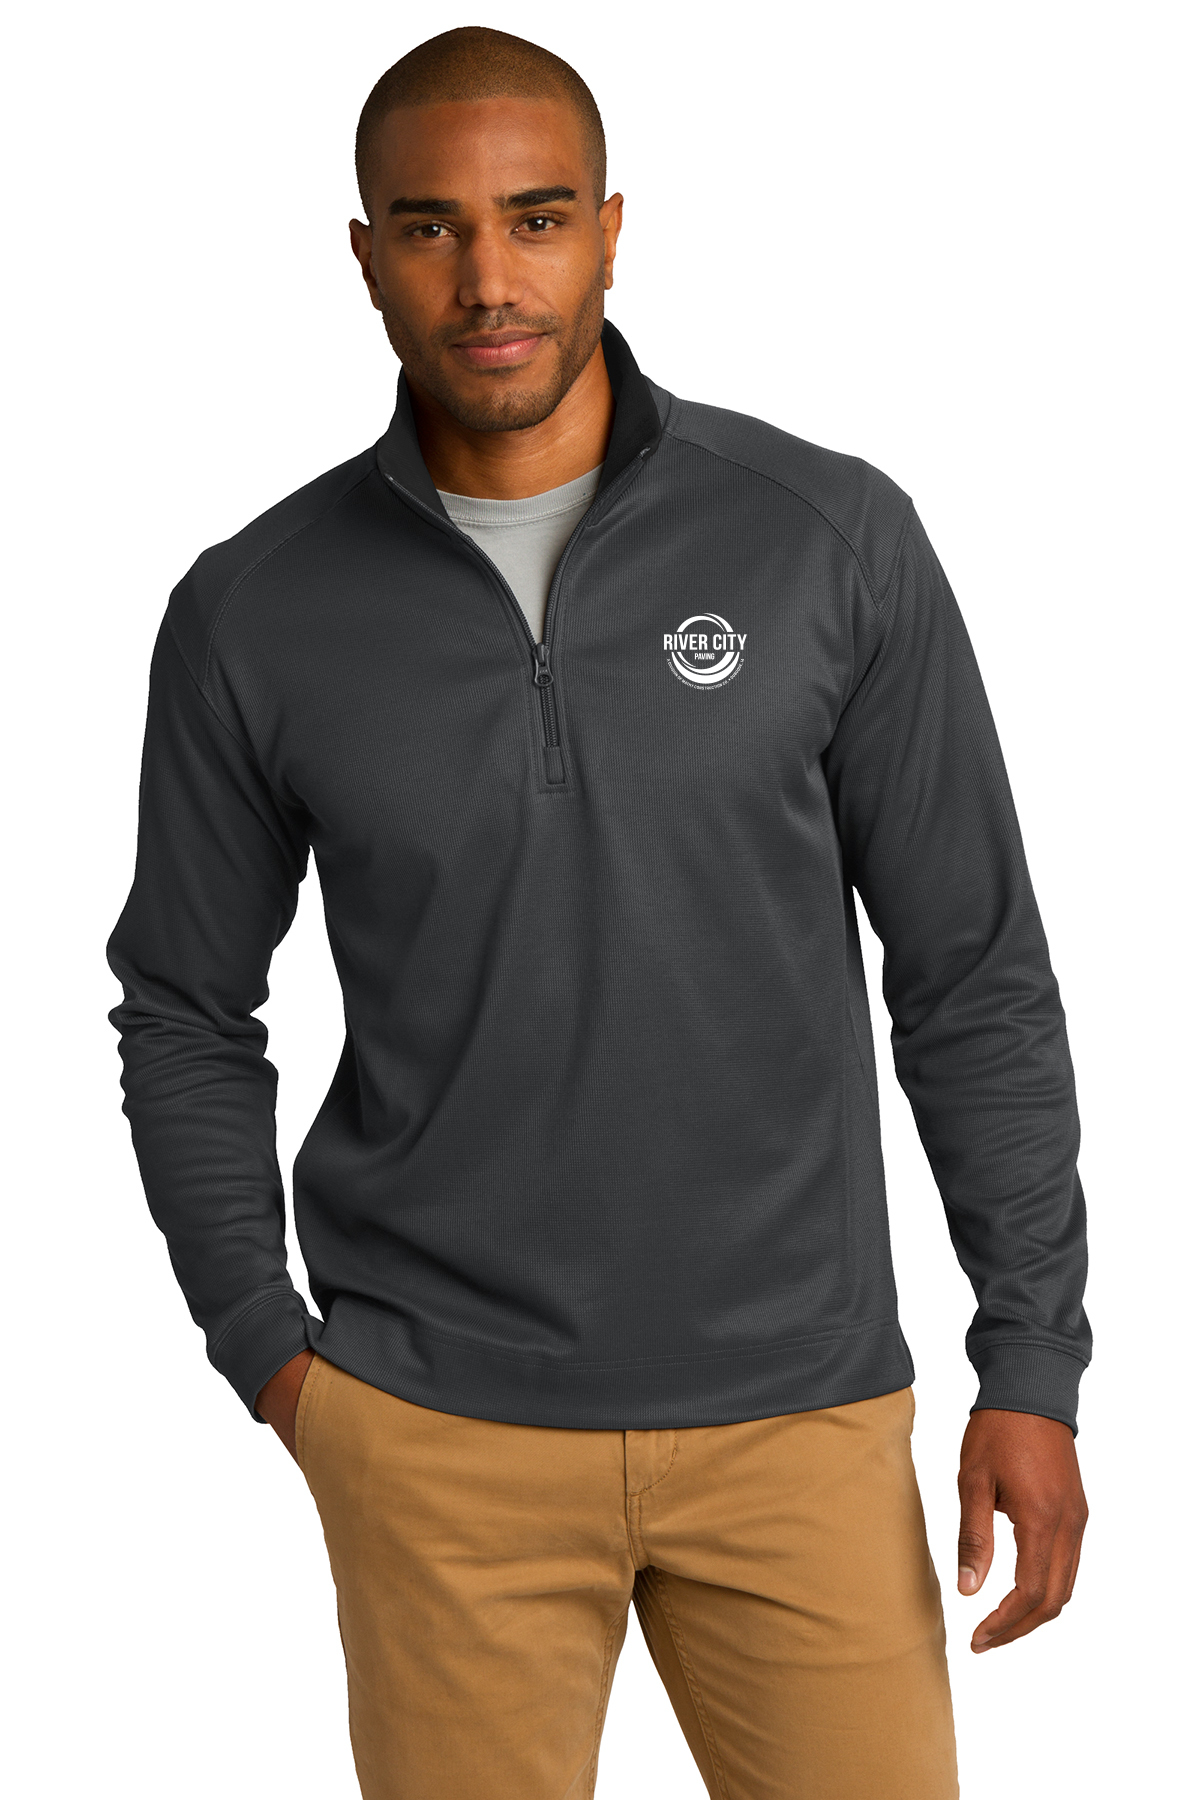 River City Paving 1/4 Zip Pullover